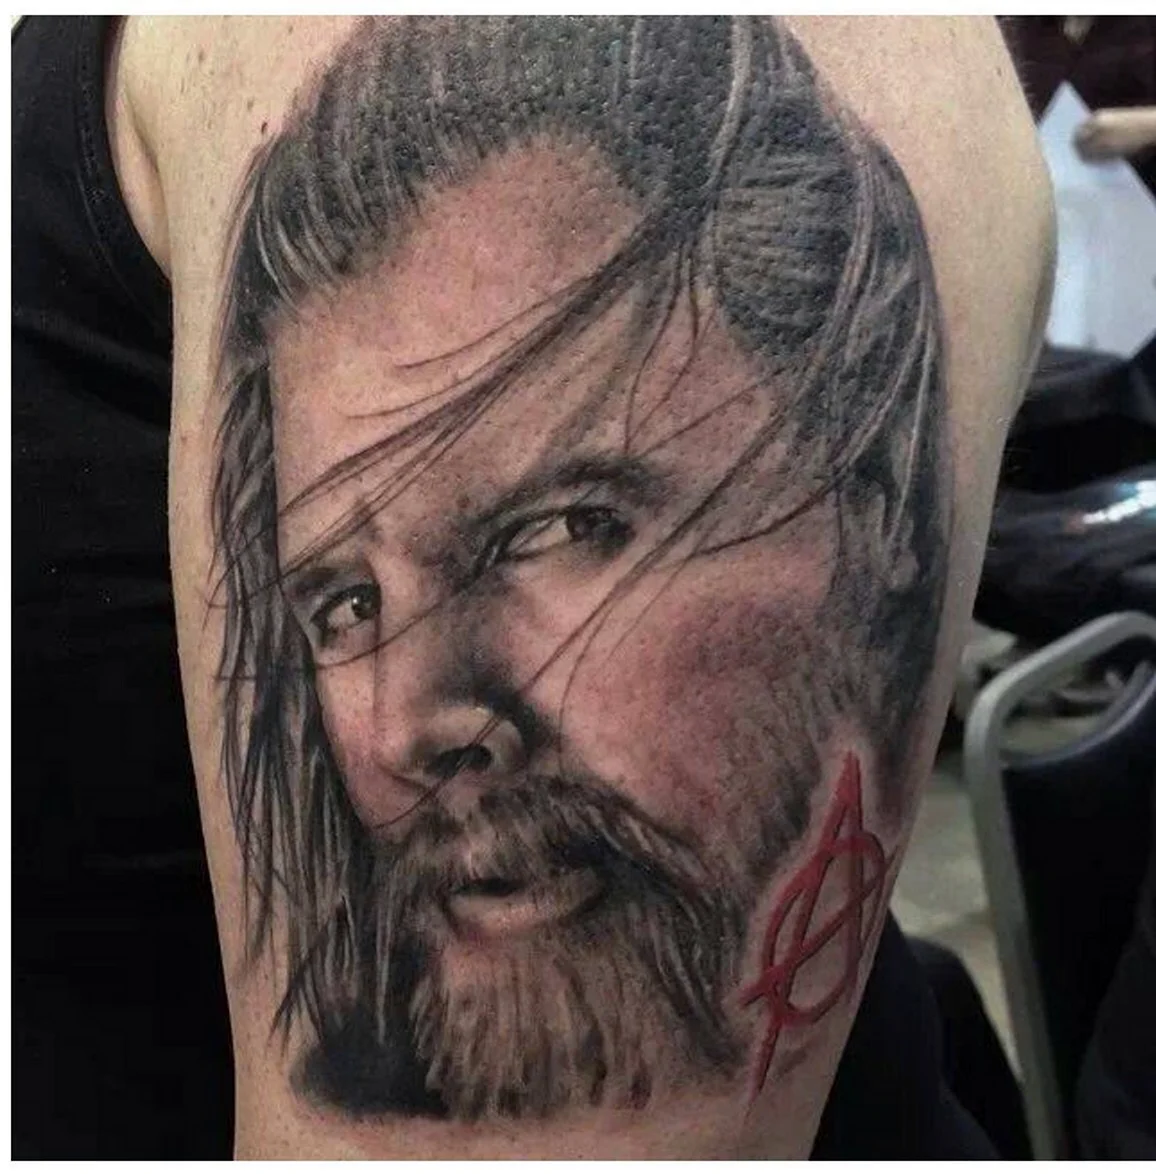 Opie sons of Anarchy Tattoo